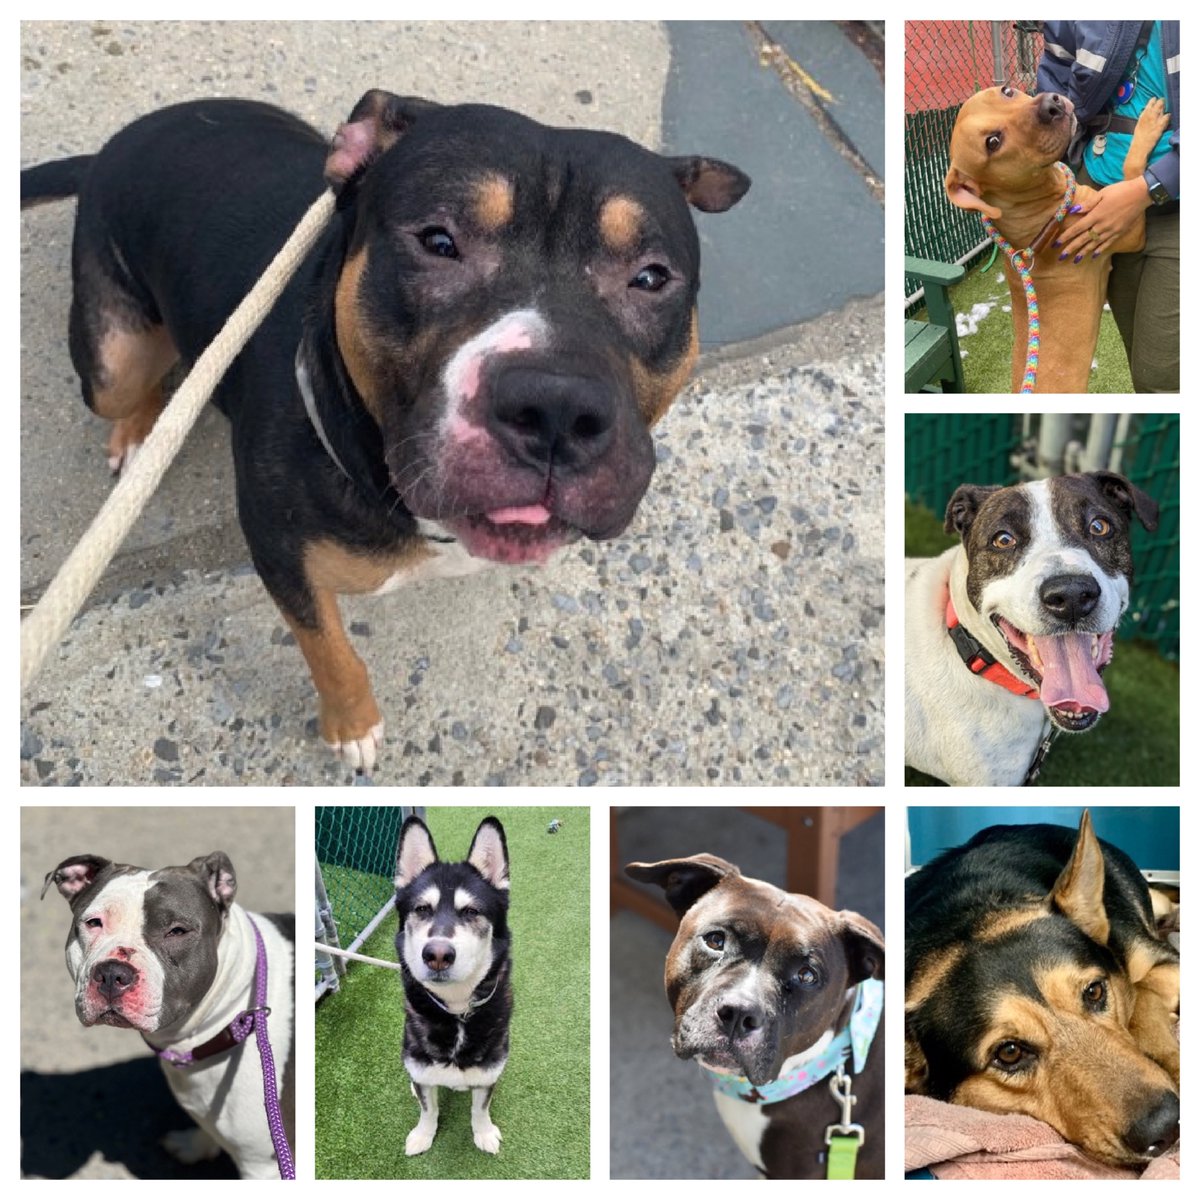 The conveyor belt of death continues in NYCACC with Shortbread, LaLa, Ruger, Bella, Marshmello, Zuna and Captain all delisted and waiting in line TBK anytime. Please repost and share where you can. Email keitholbermanndogs@gmail.com urgently if you can help anyone. Thank you.